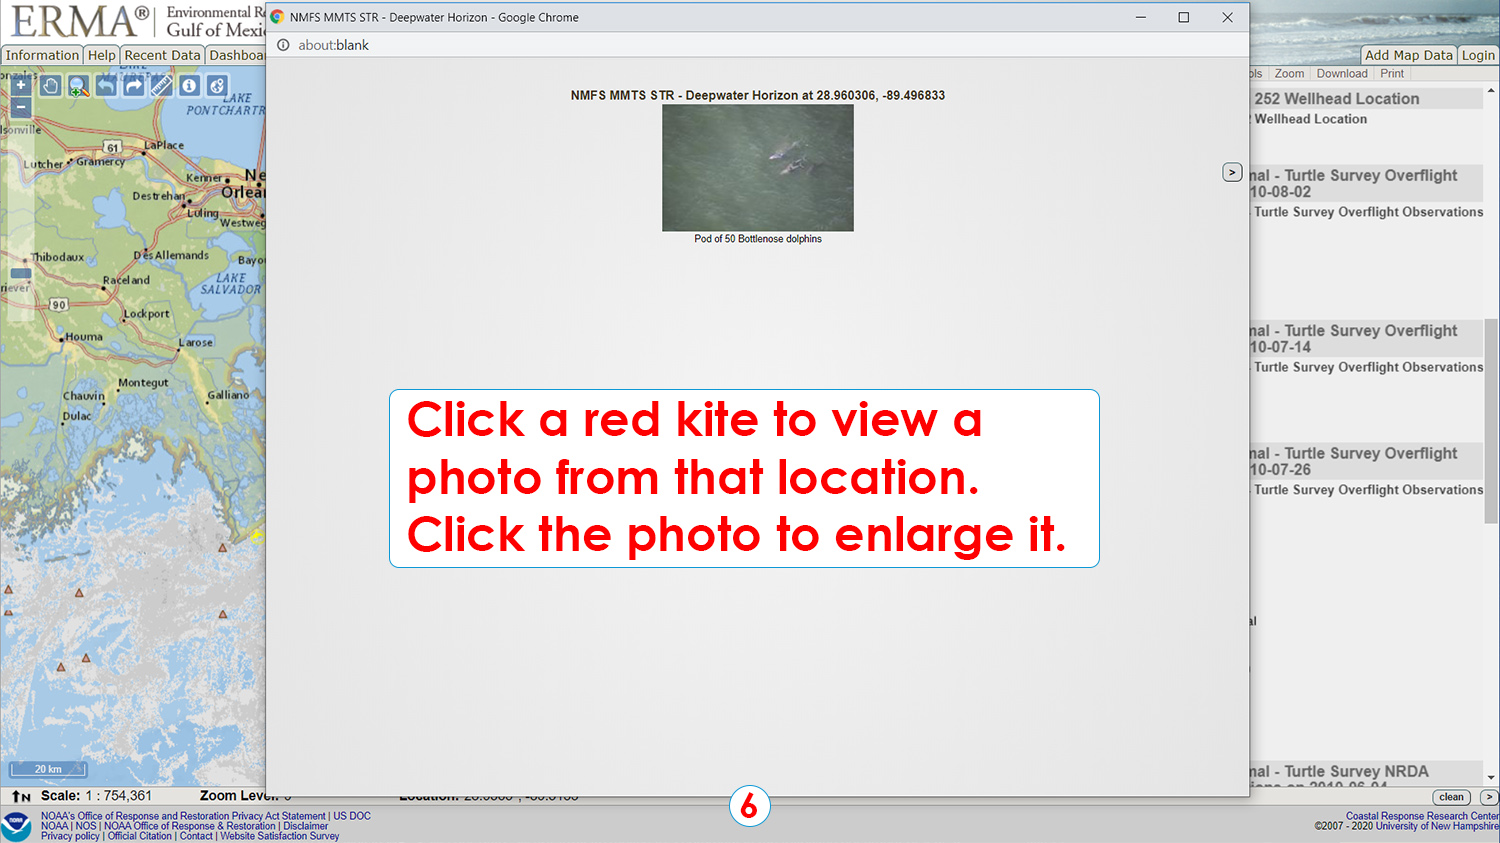 Step 6: Click a red kite to view a photo from that location. Click the photo to enlarge it.